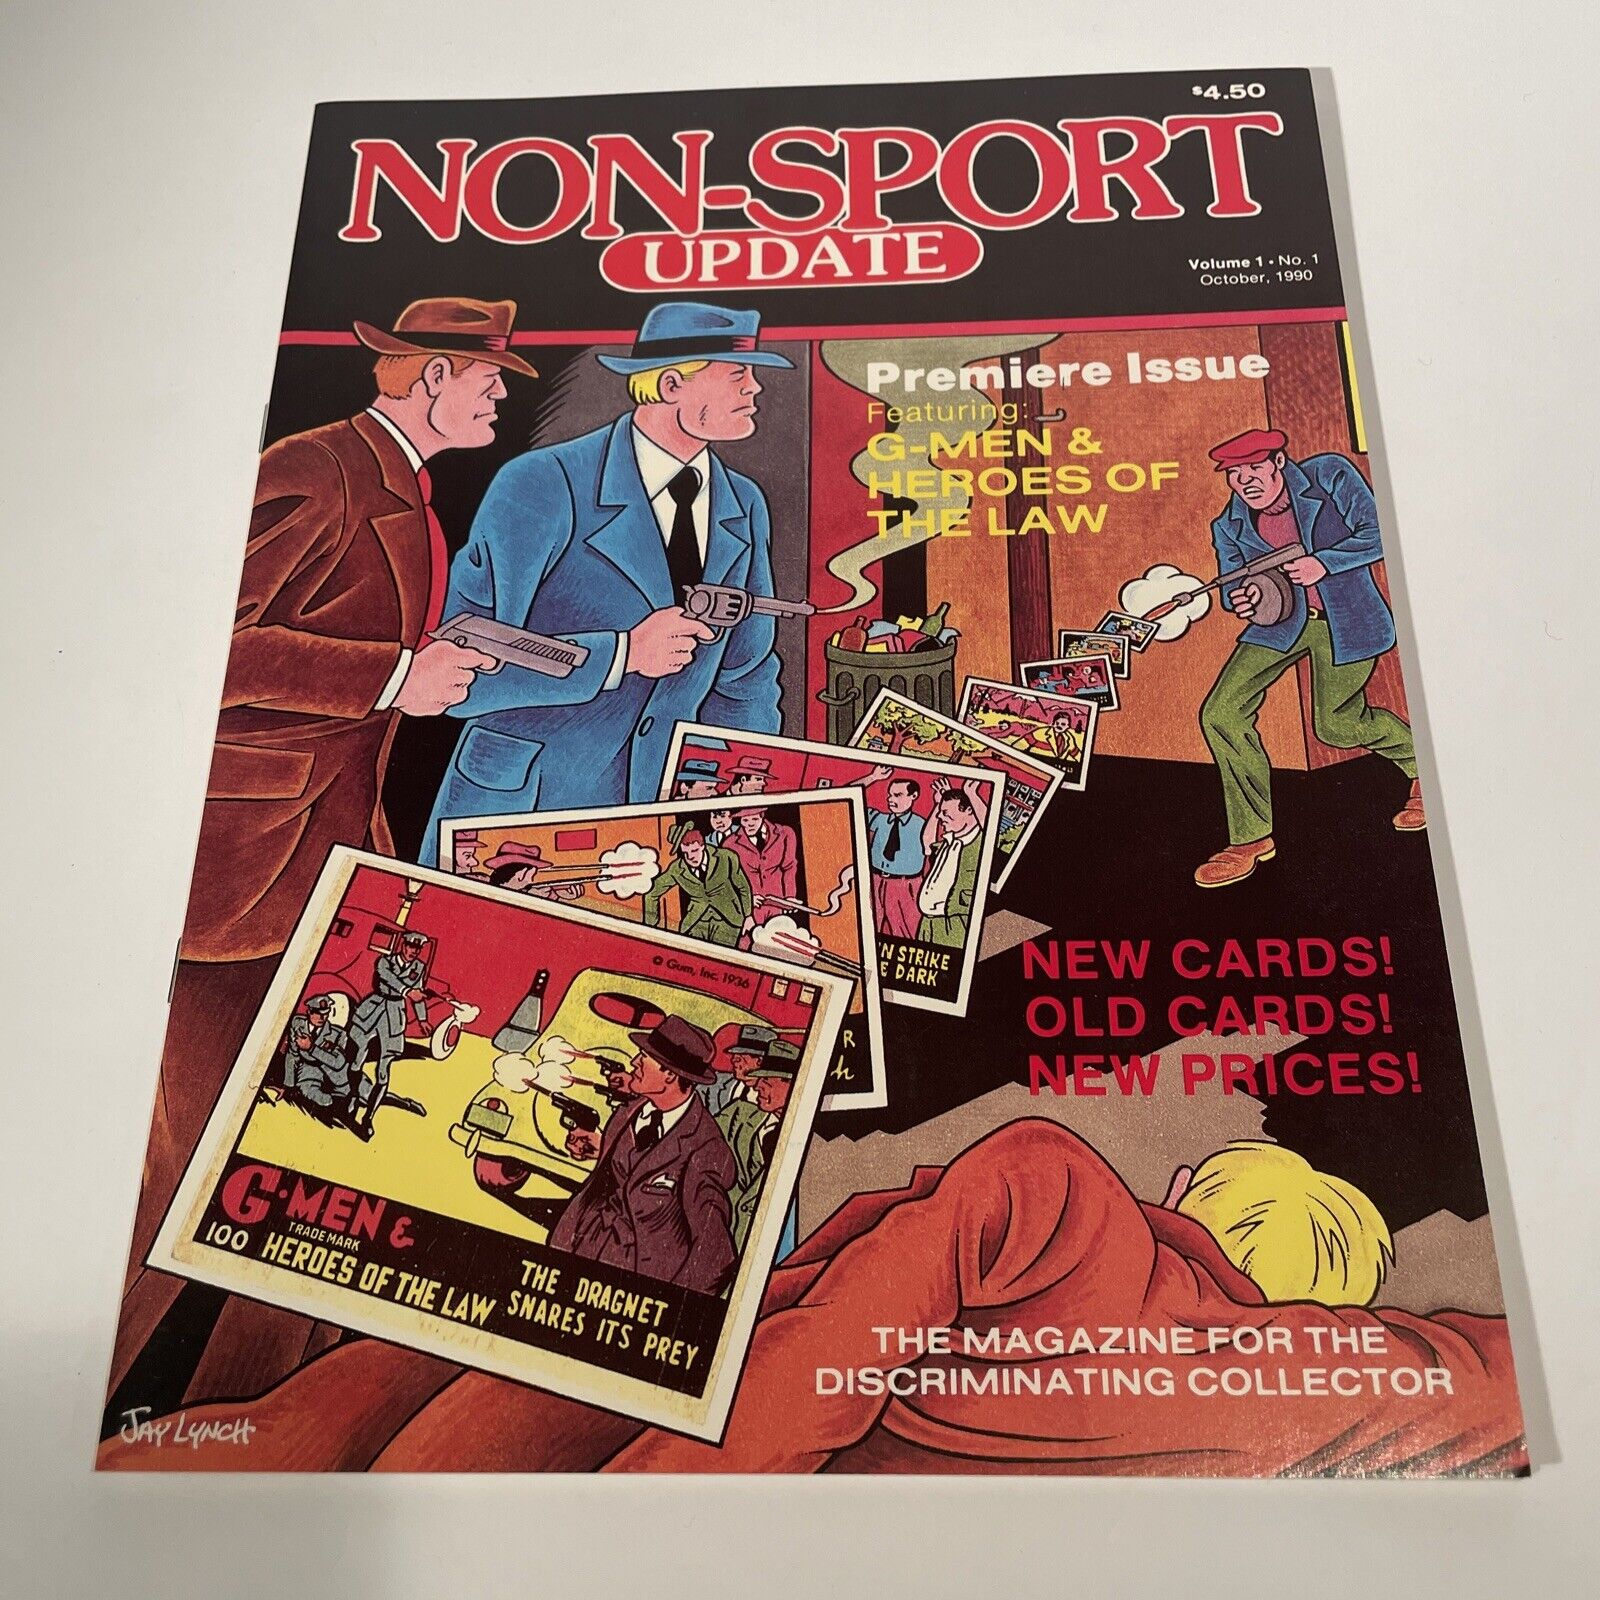 Vtg Non-sport Update Vol 1 No 1 - Oct 1990, Has Potential Buyers And Sellers